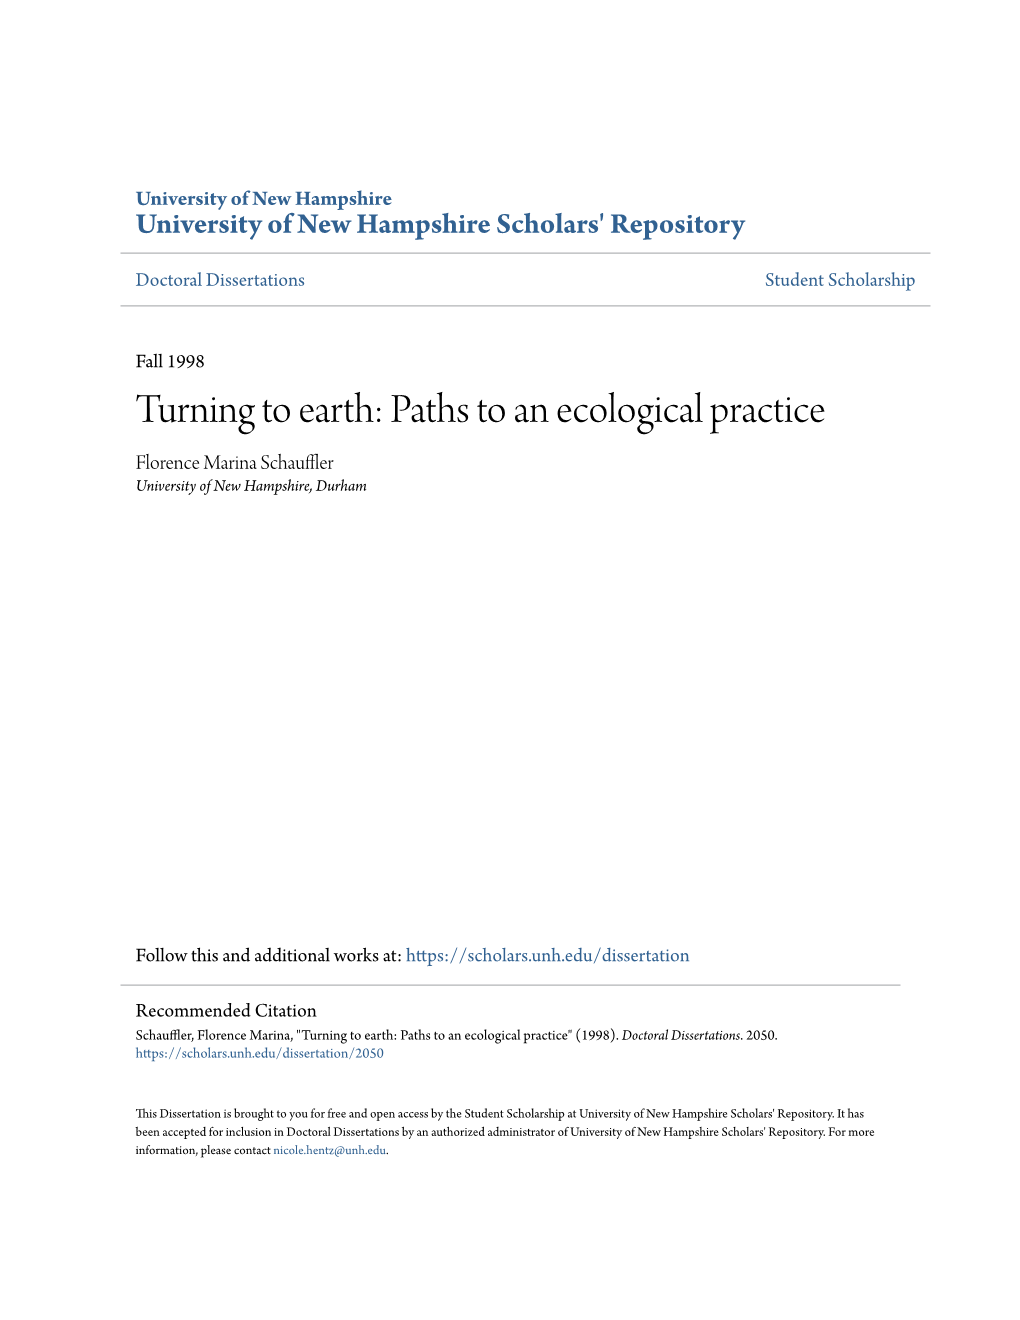 Turning to Earth: Paths to an Ecological Practice Florence Marina Schauffler University of New Hampshire, Durham